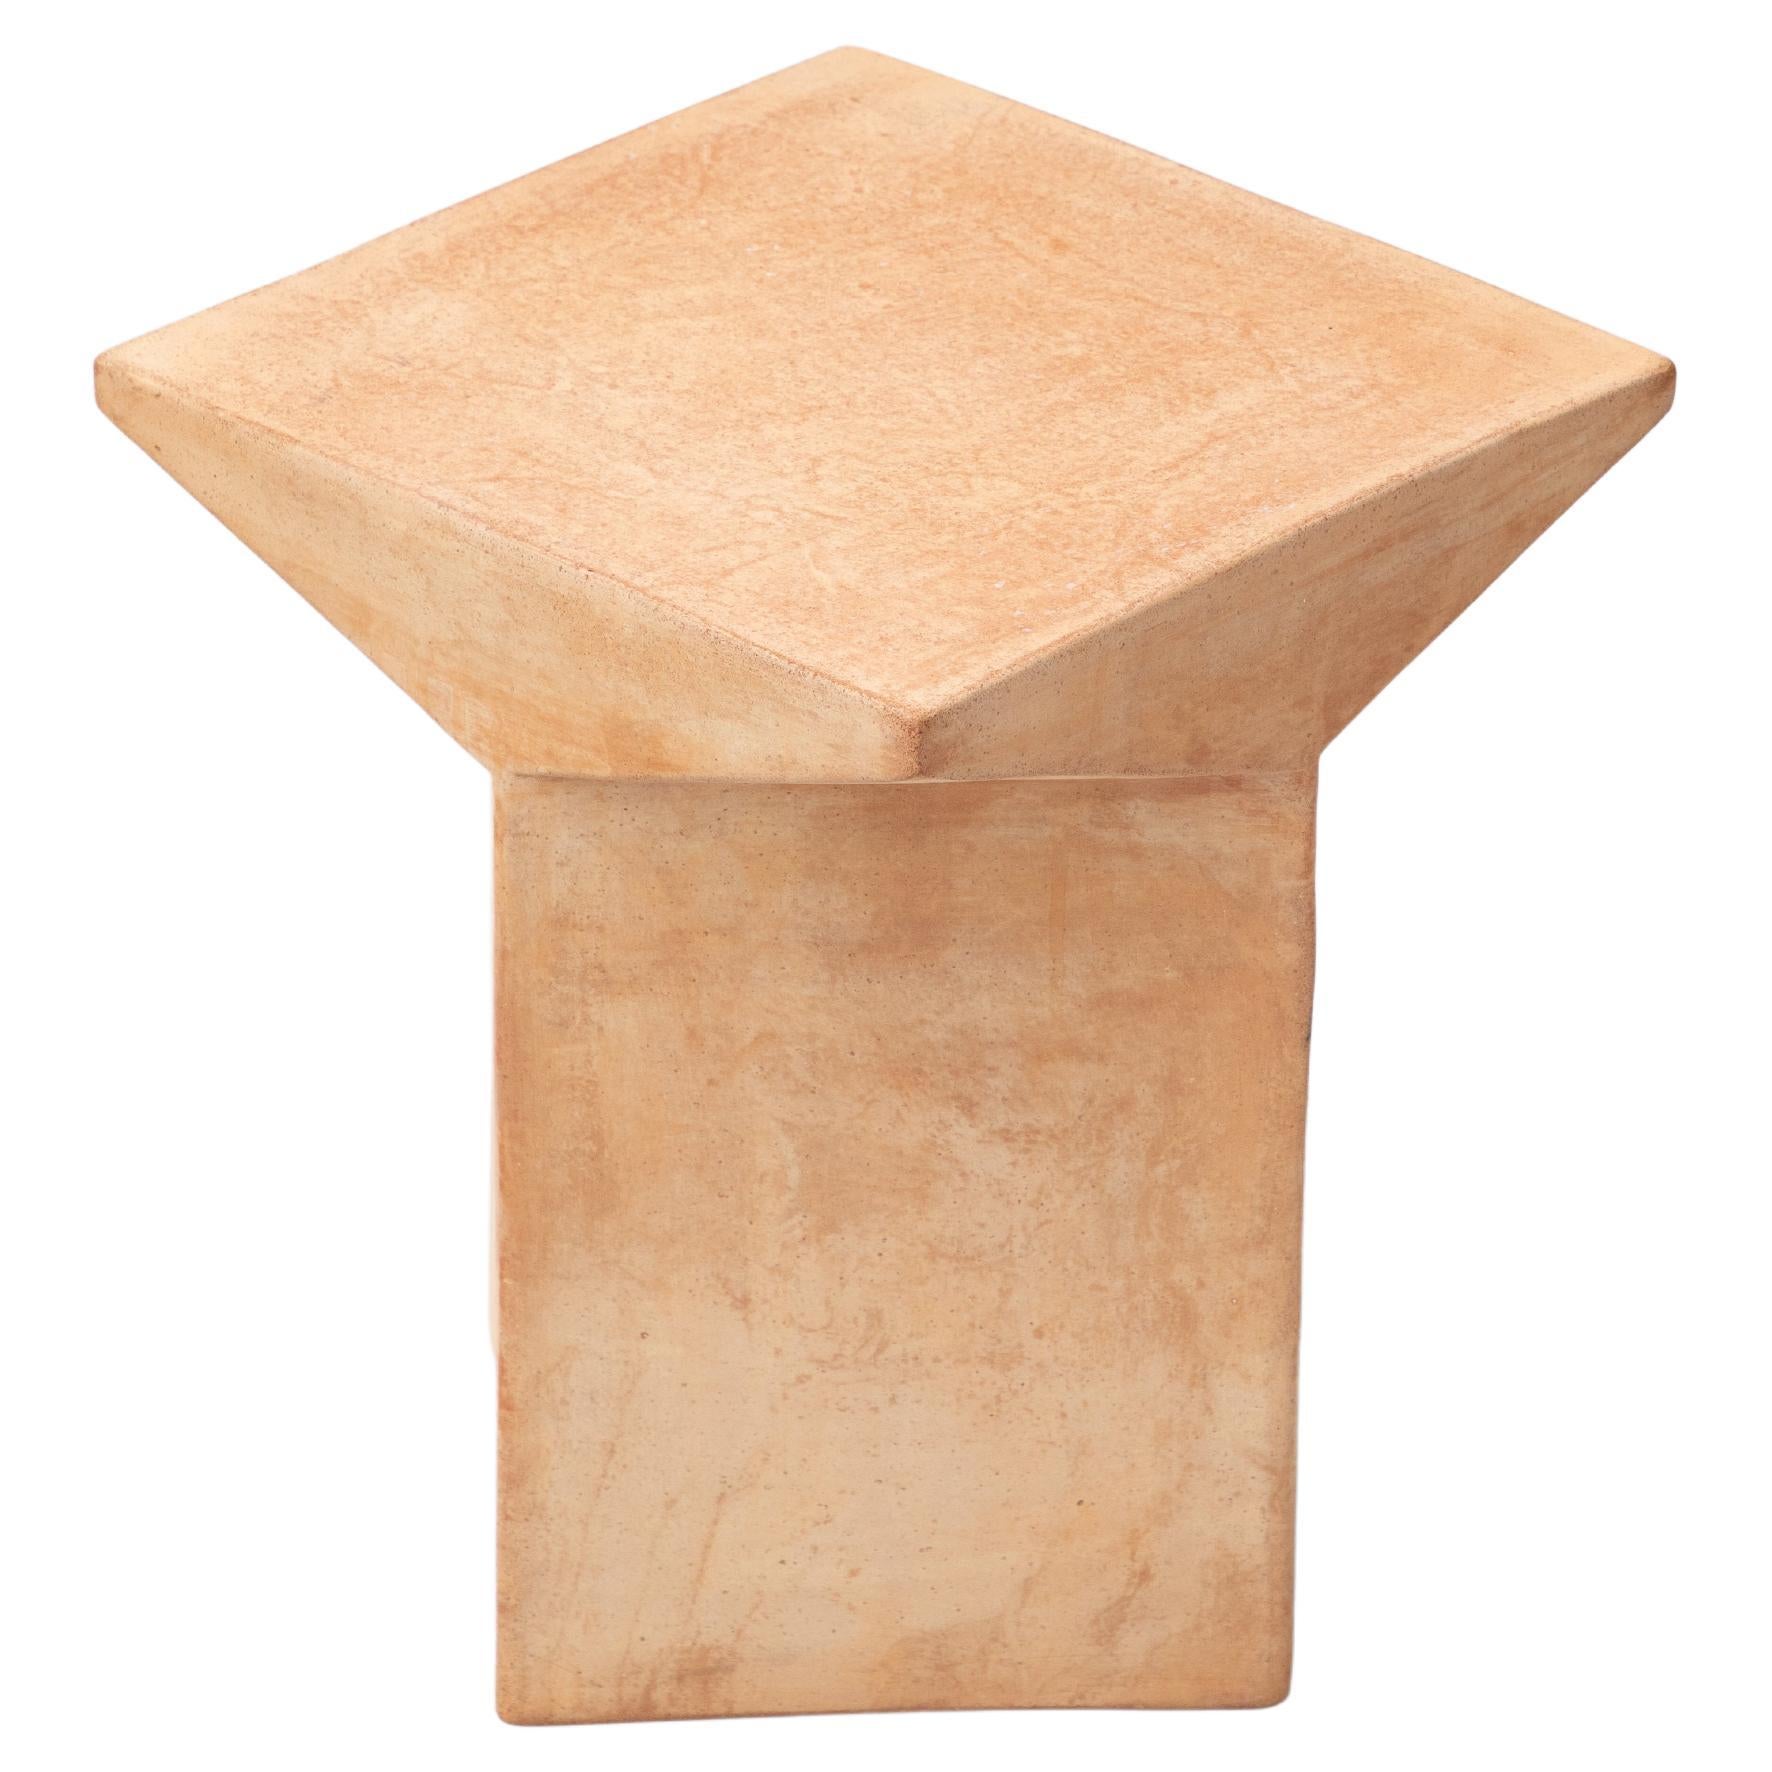 New Volumes Terracotta Pitcher Stool by Adam Goodrum For Sale